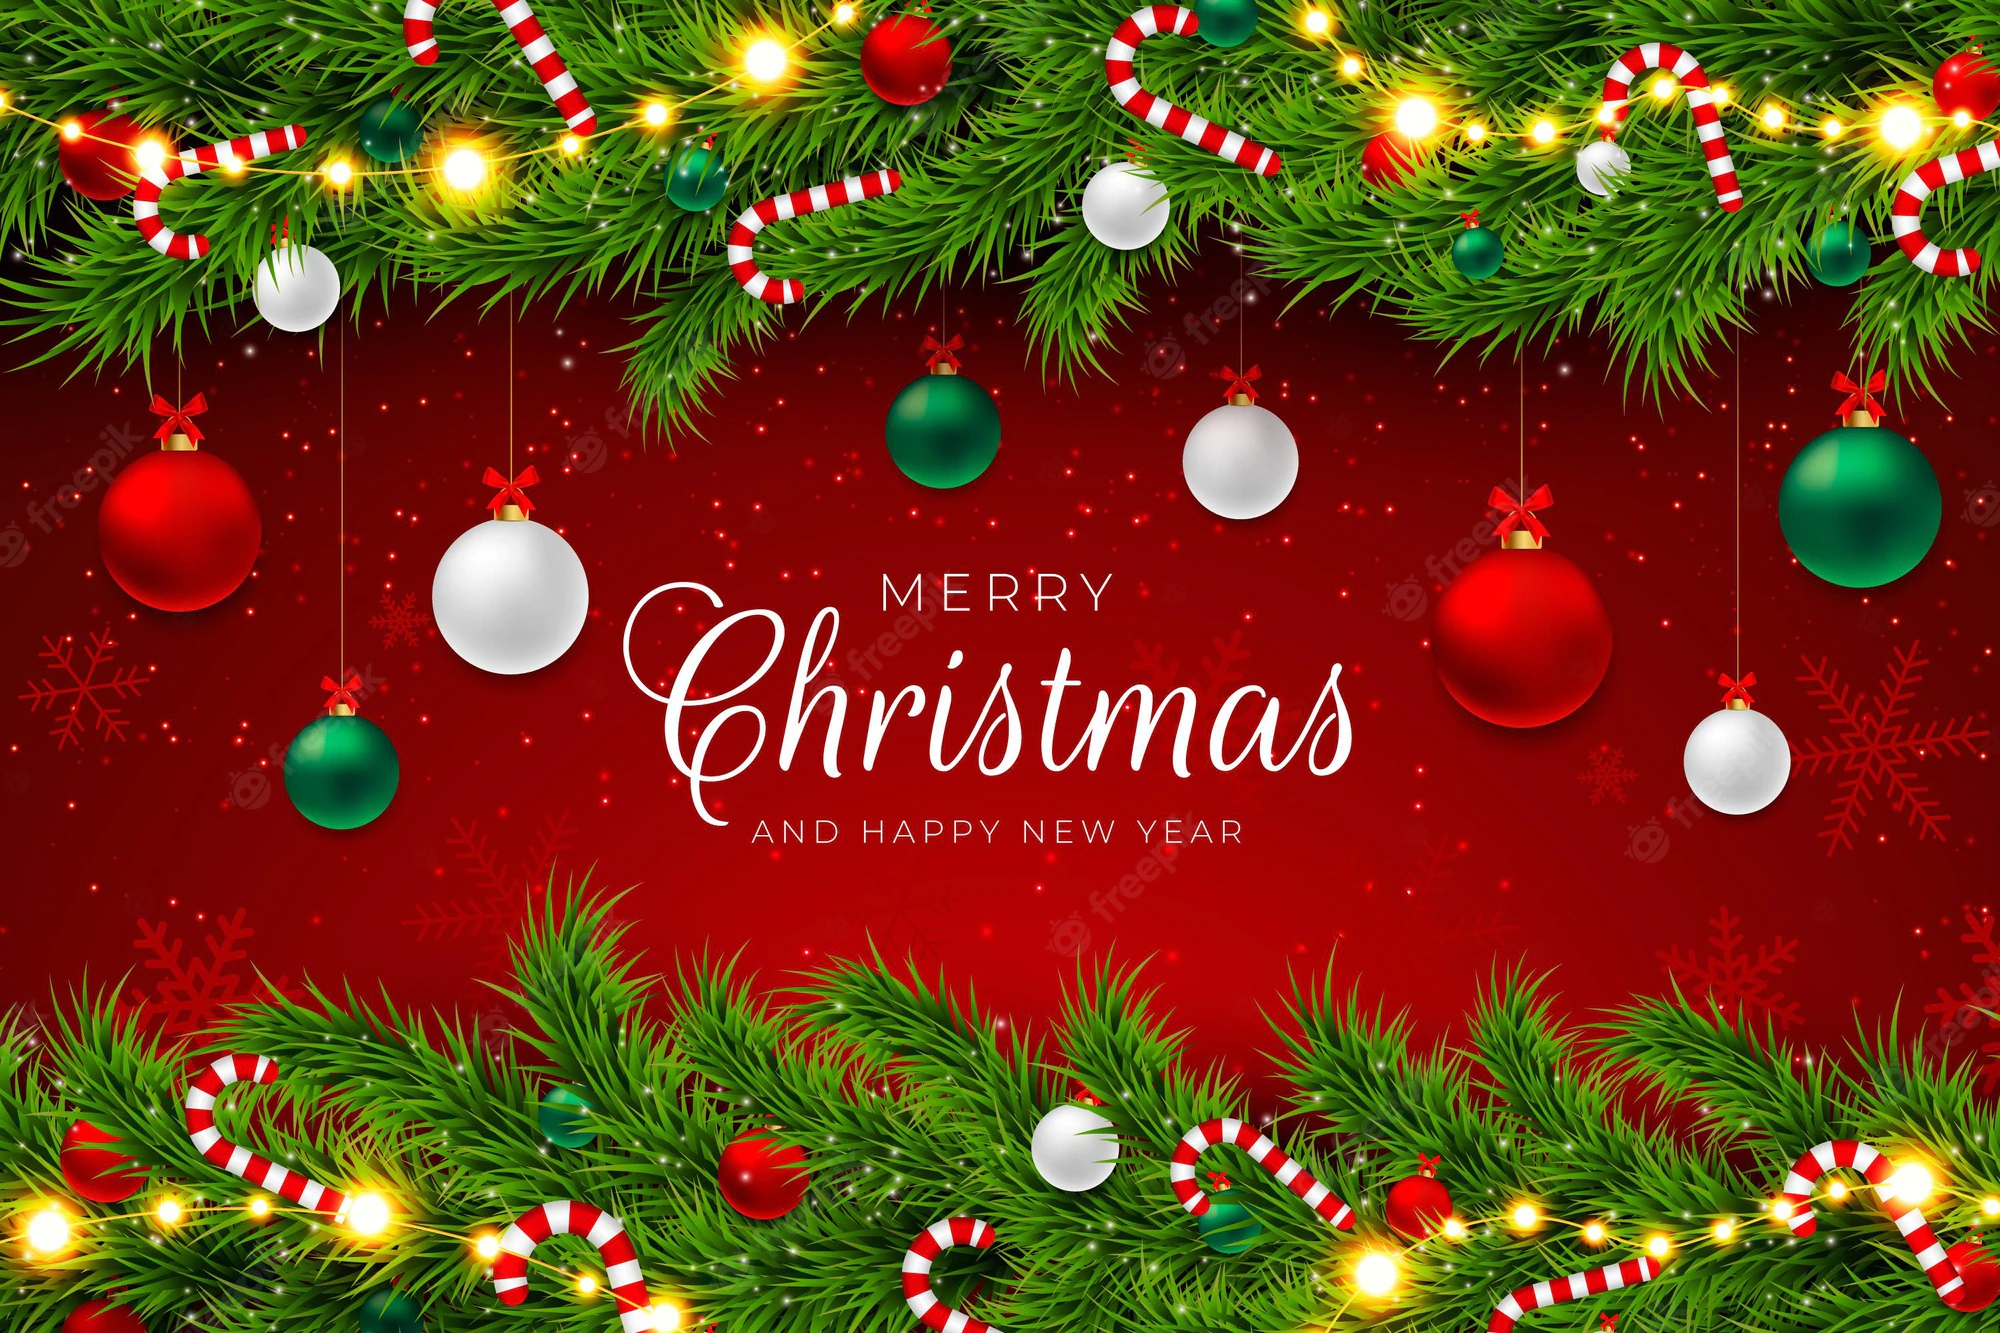 gradient-christmas-tinsel-background_52683-76117